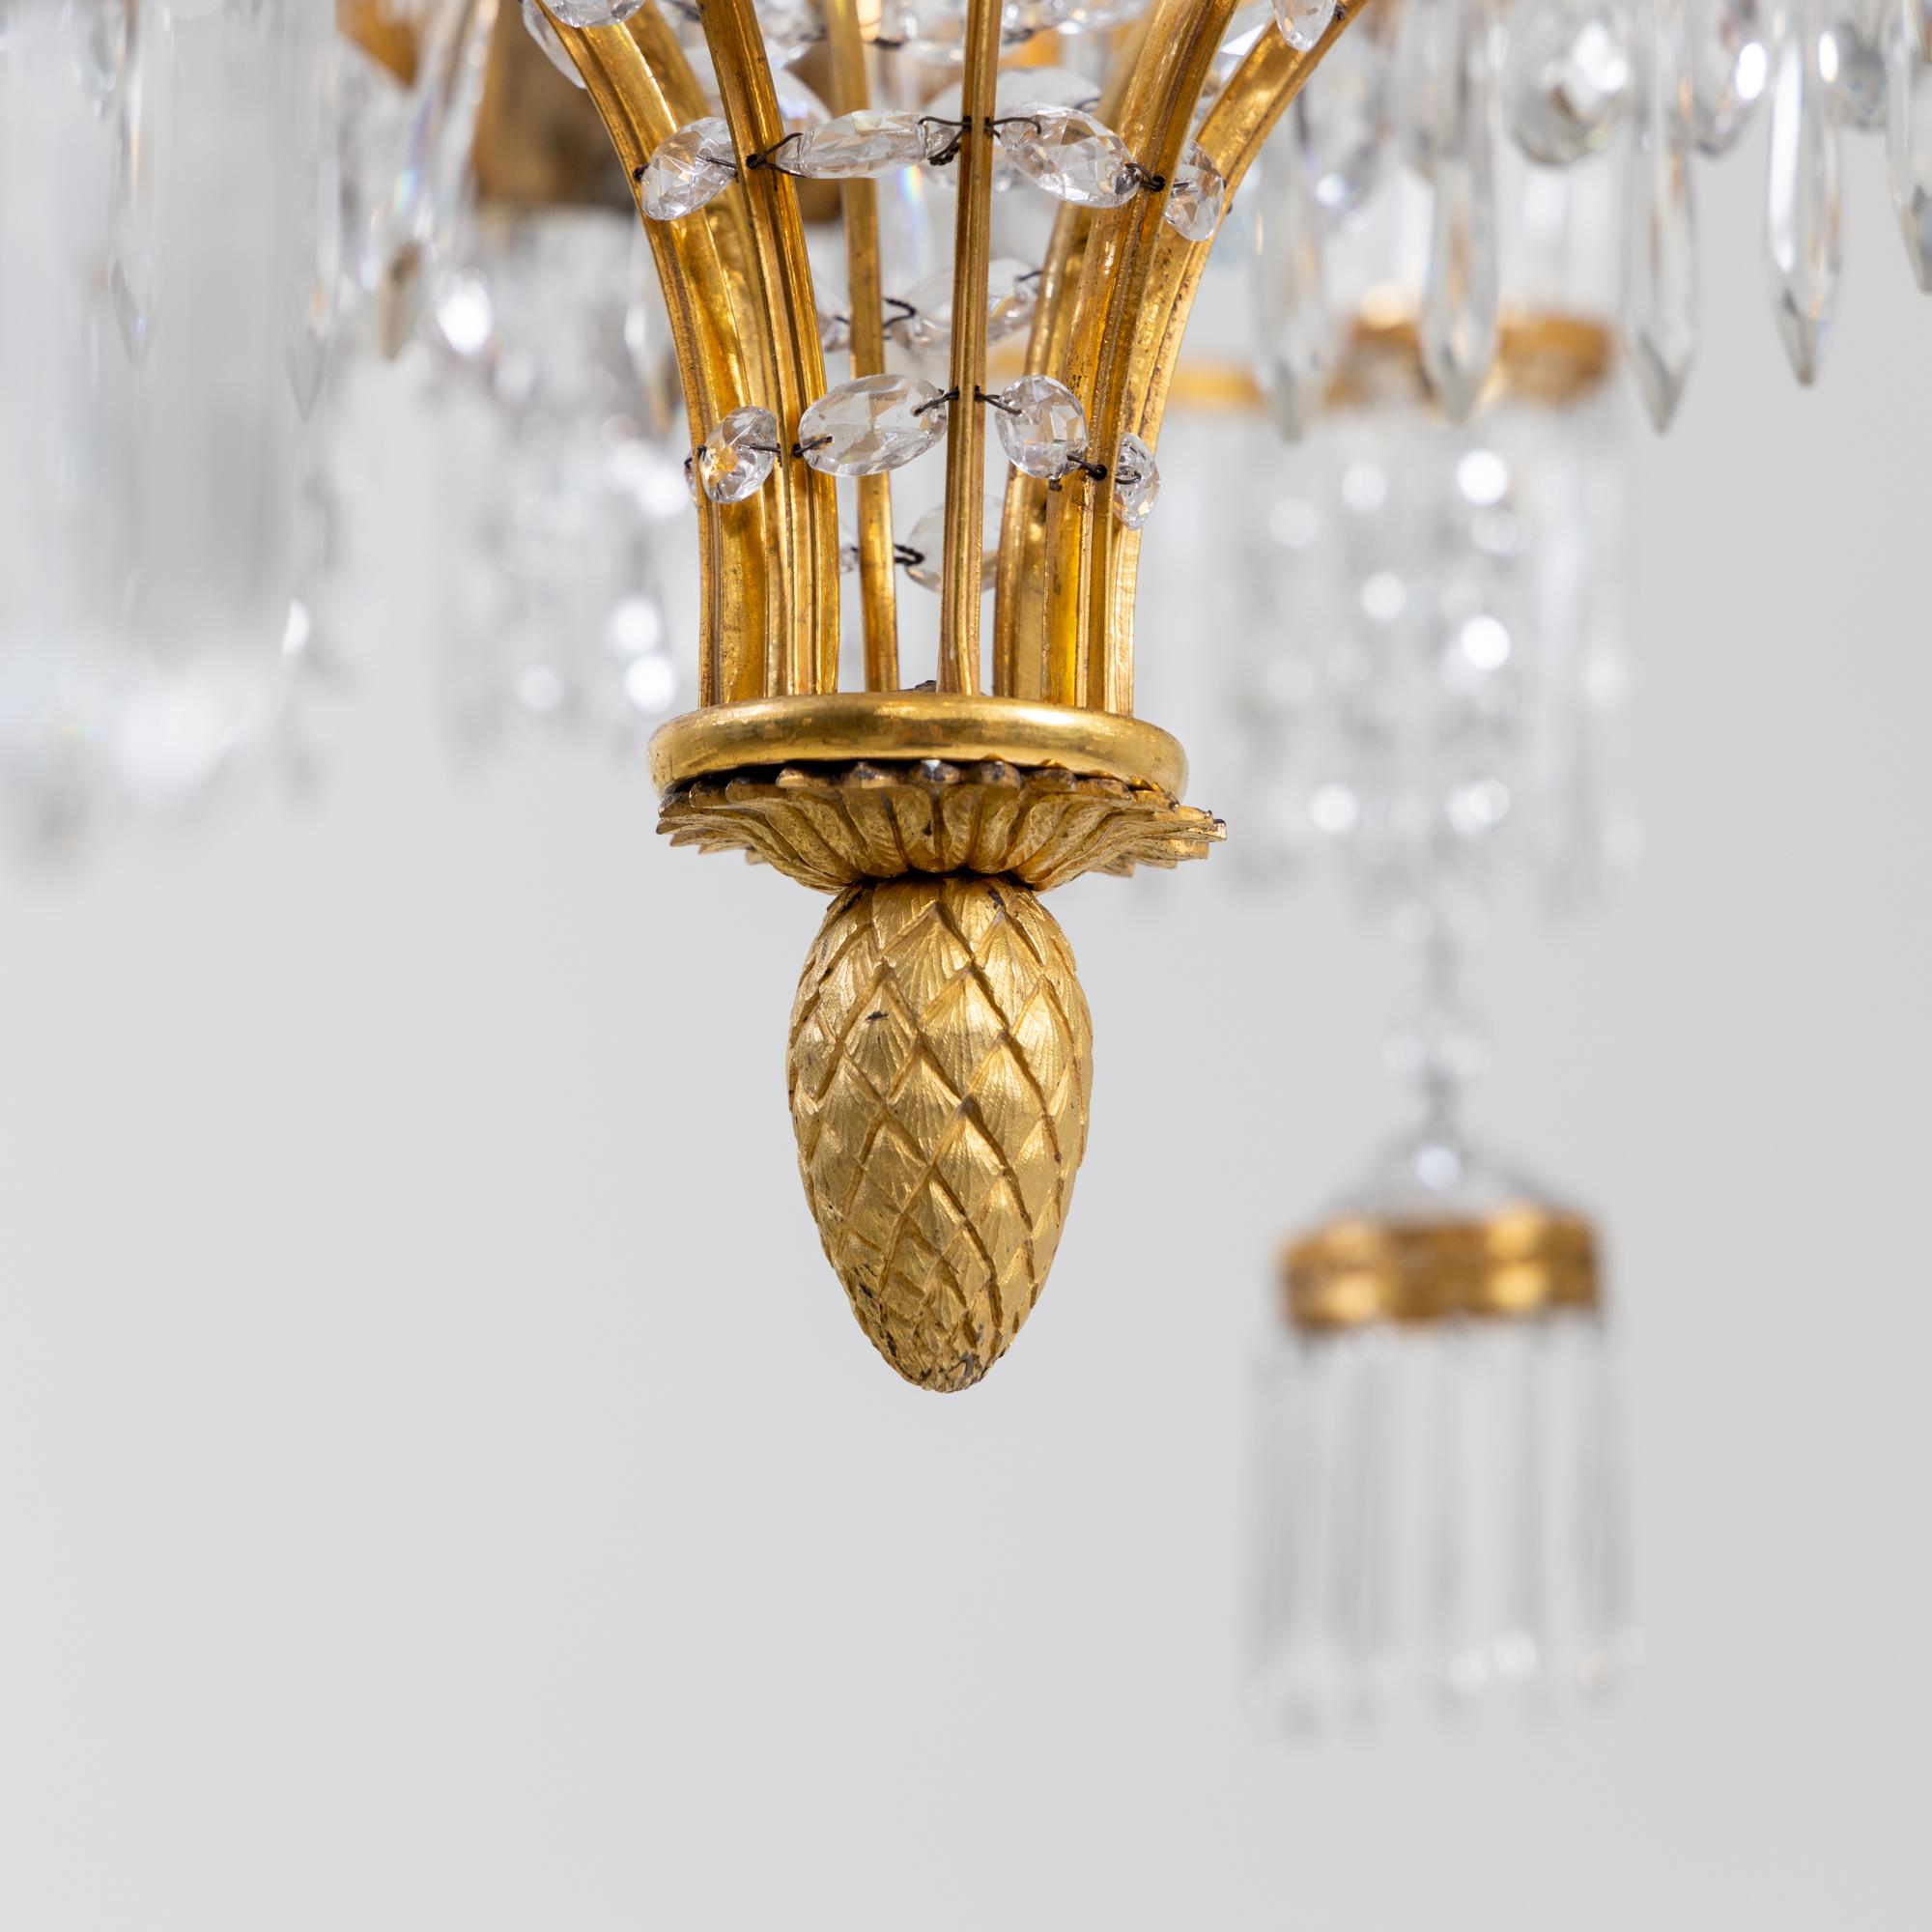 Chandelier with Palm Trees, Werner & Mieth, Berlin c. 1800-1810 For Sale 7